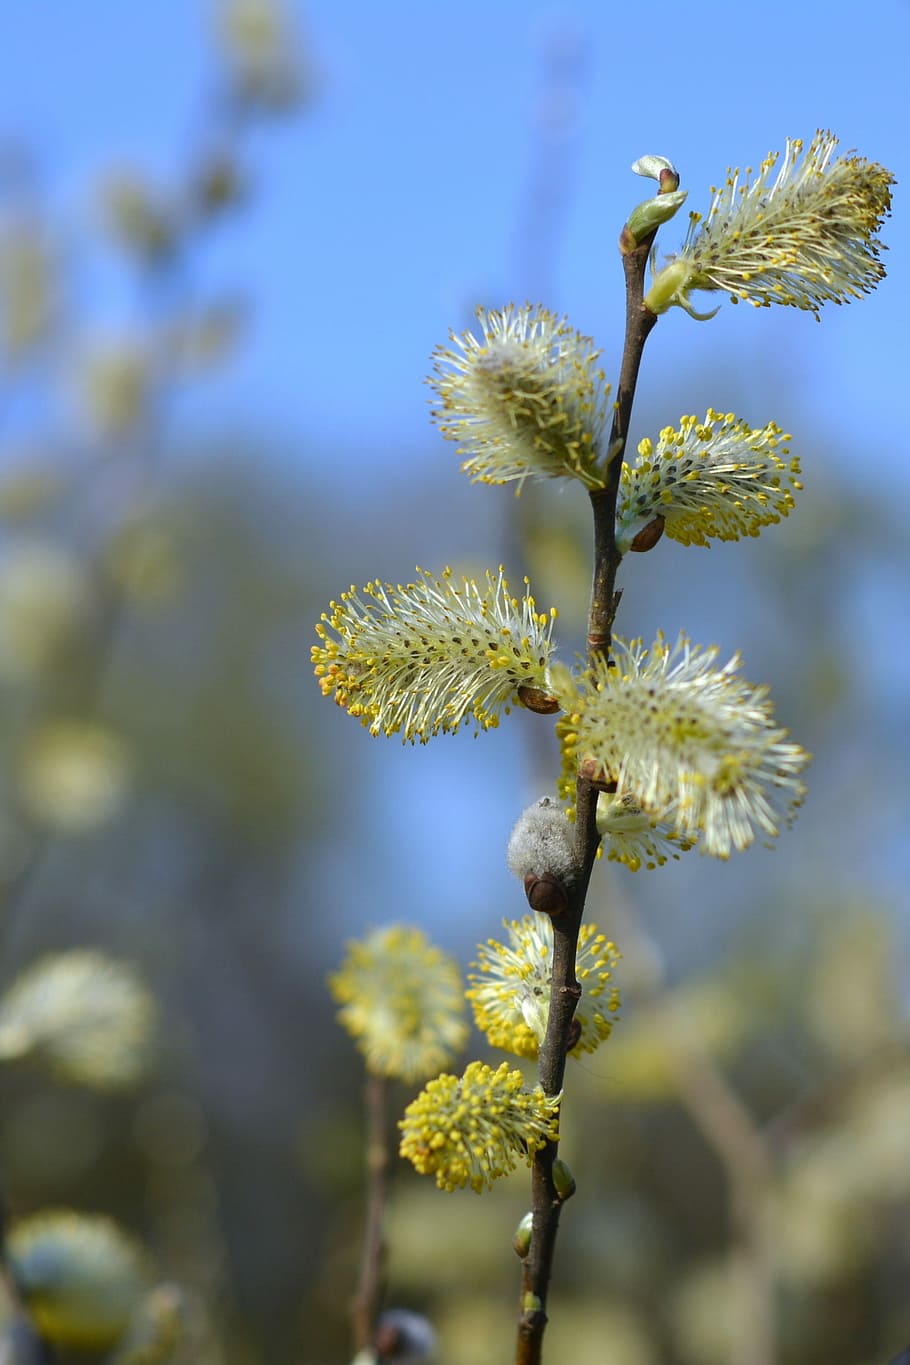 Basis, Willow, Catkins, the basis of, catkins willow, willow cats, spring, plant, growth, nature